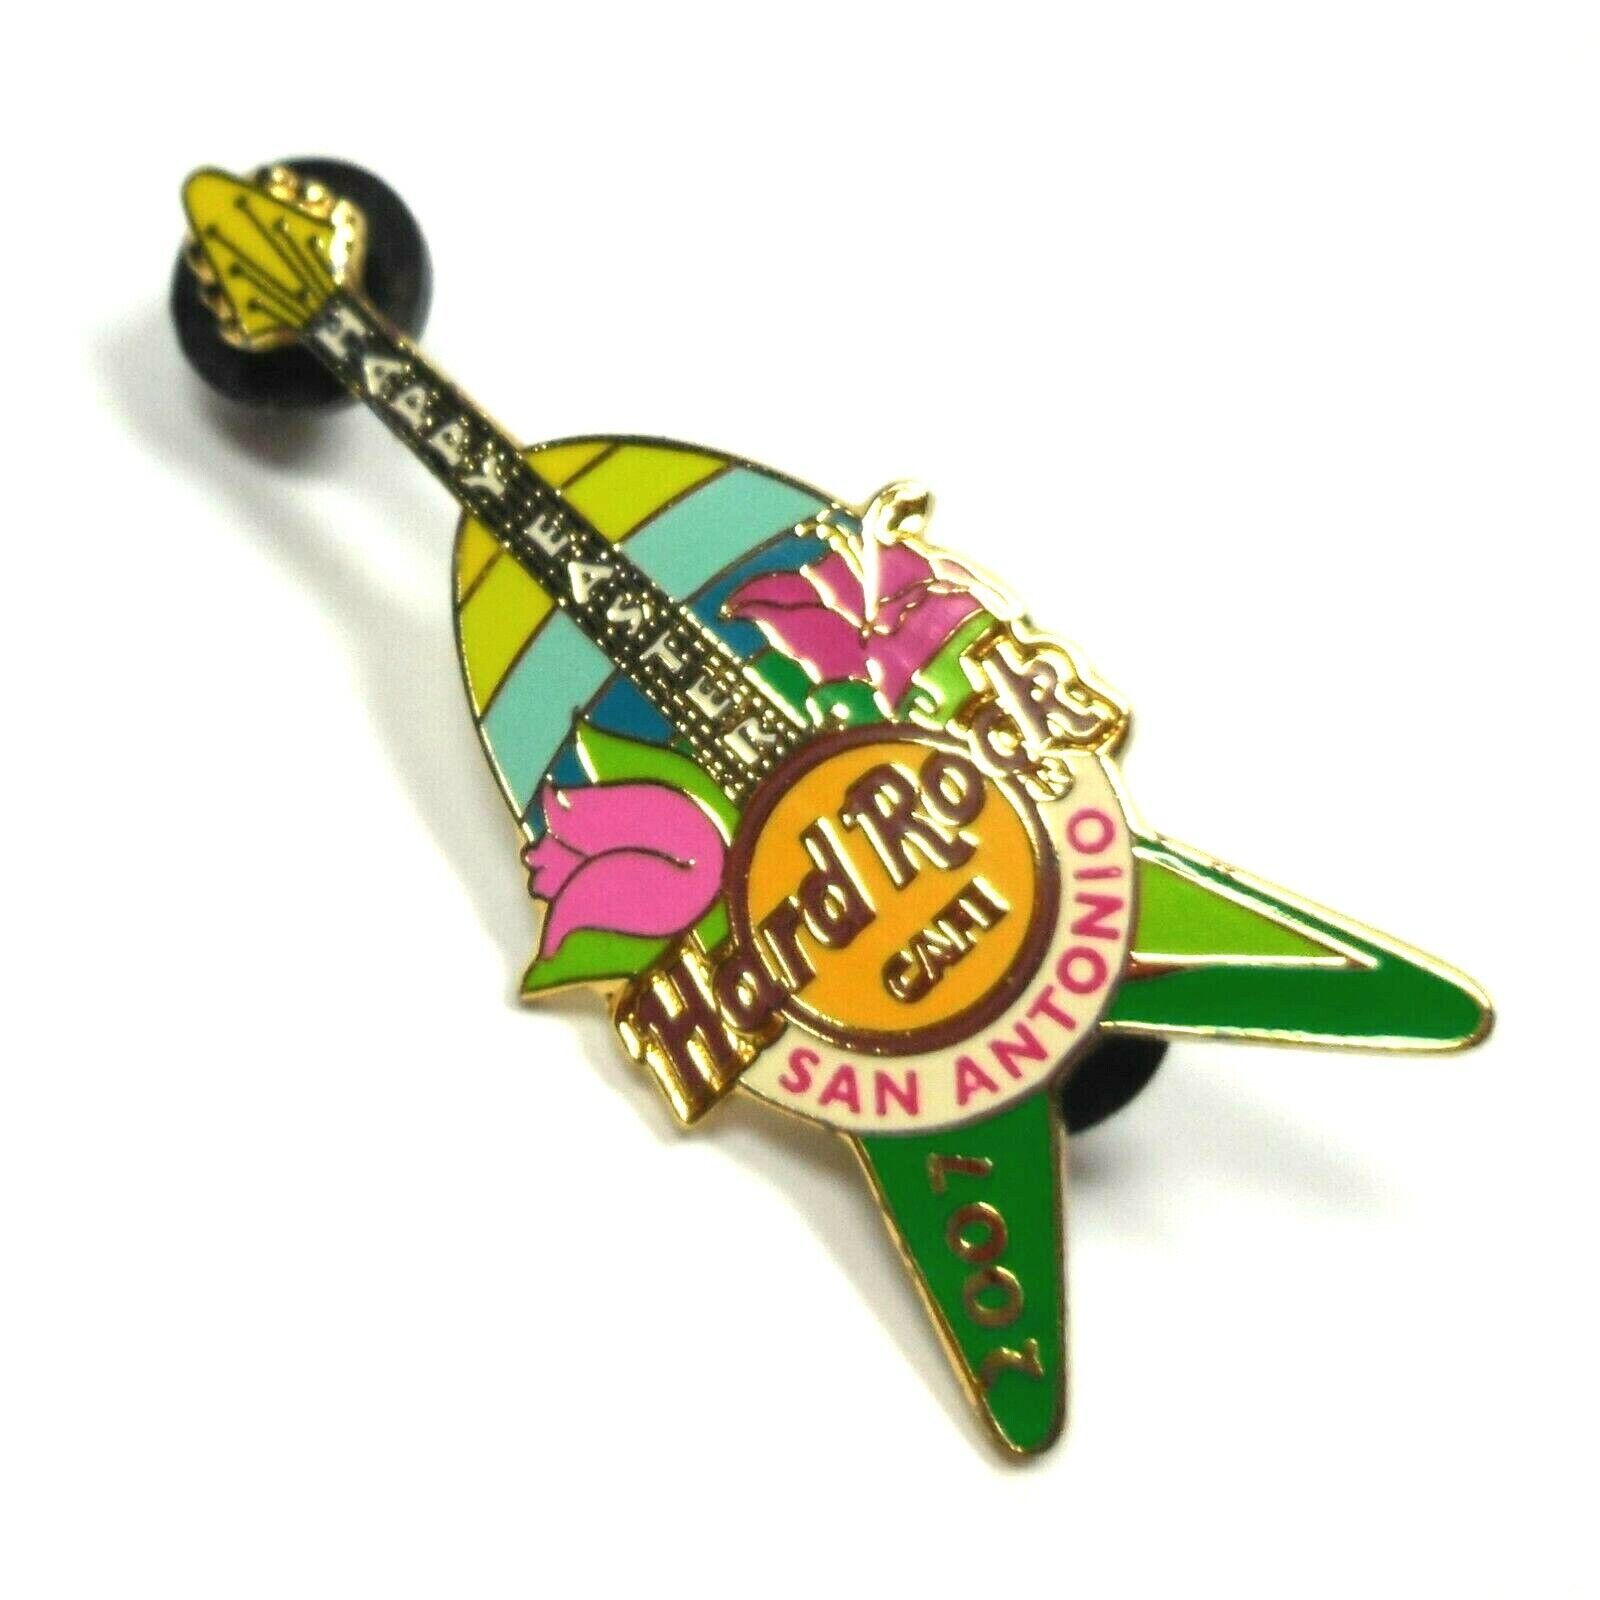 Primary image for Hard Rock Café San Antonio Pin 2007 Limited Edition Happy Easter Guitar